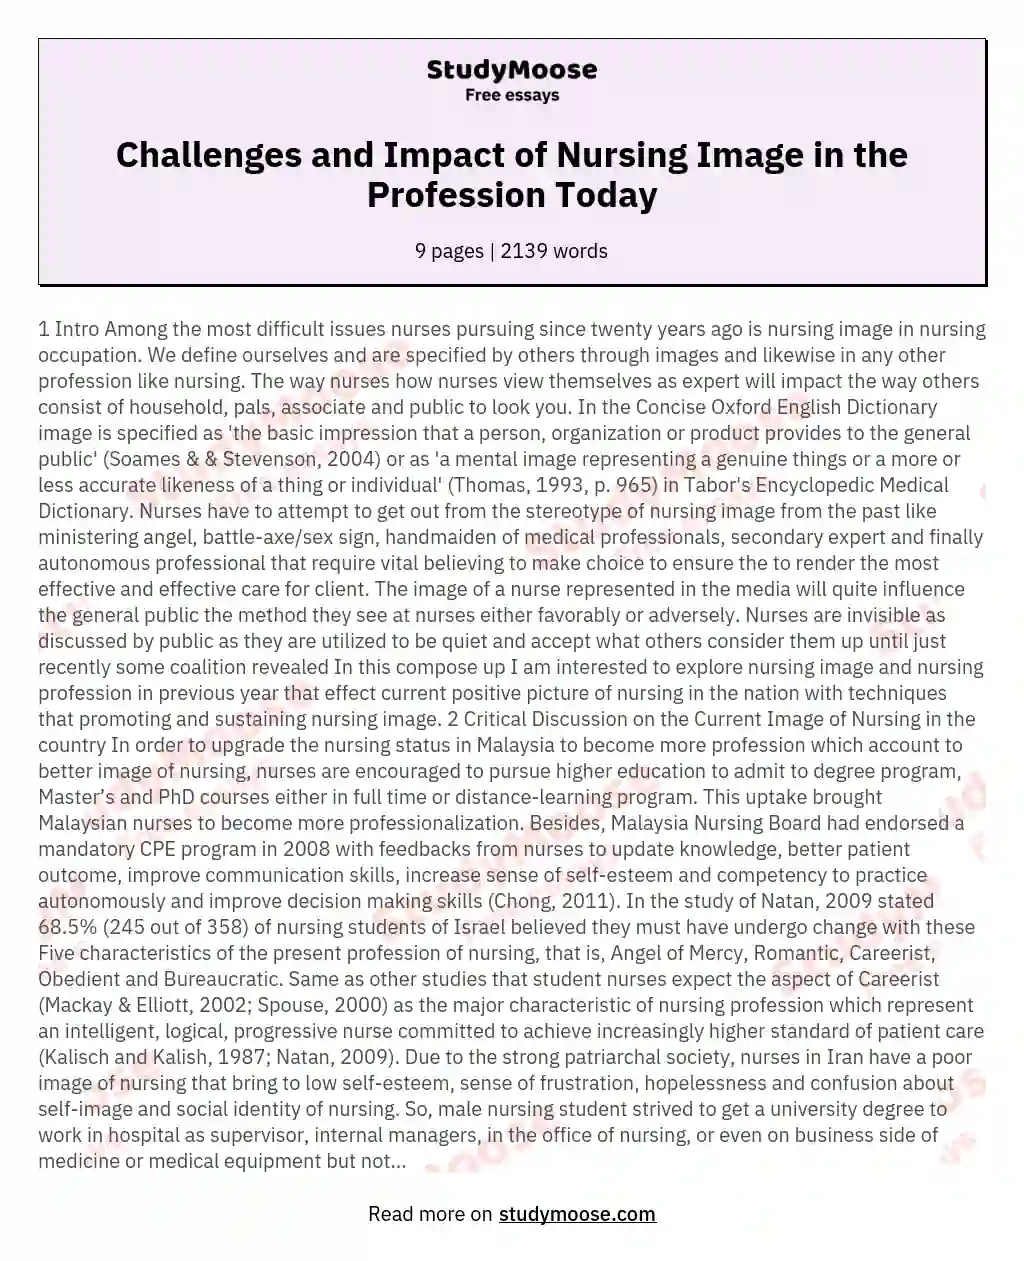 Challenges and Impact of Nursing Image in the Profession Today essay